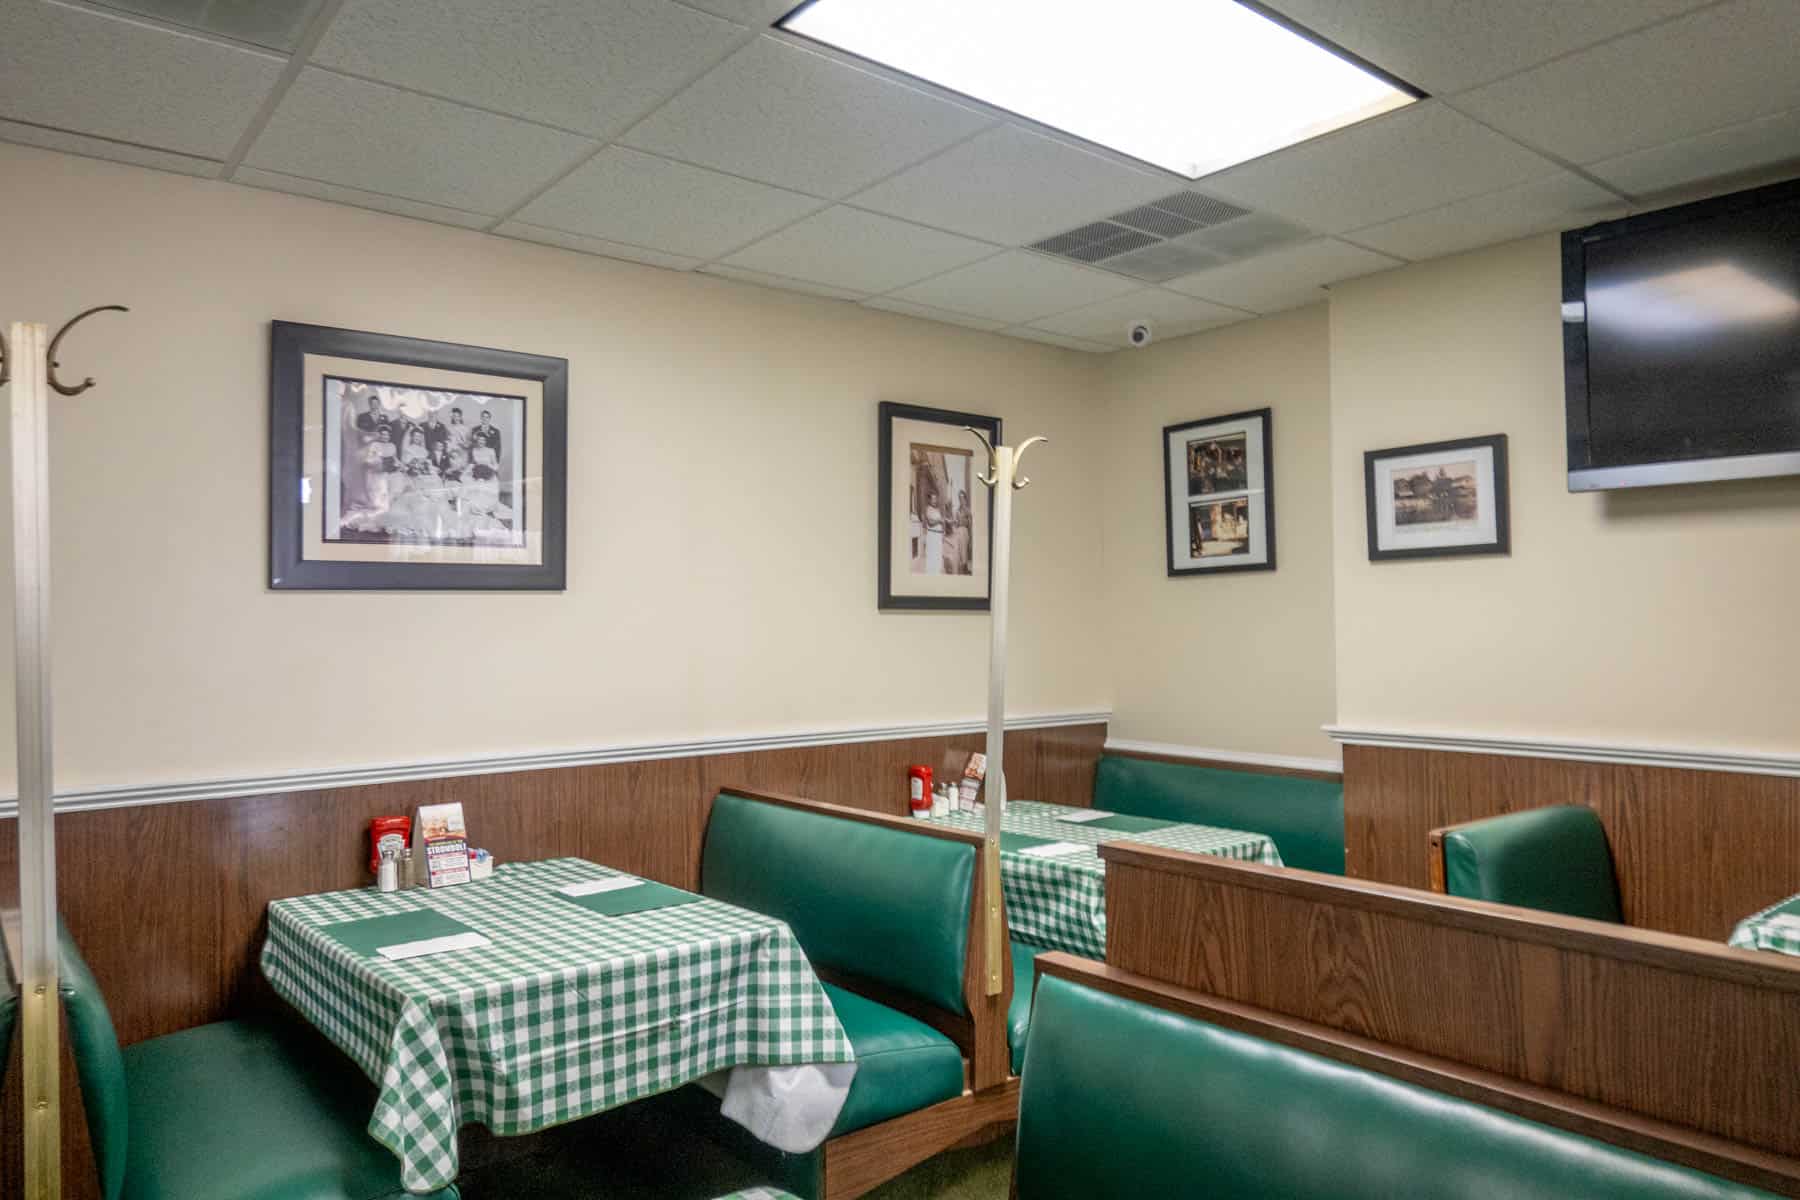 Booths in an Italian eatery with green and white tablecloths and family photos on the wall